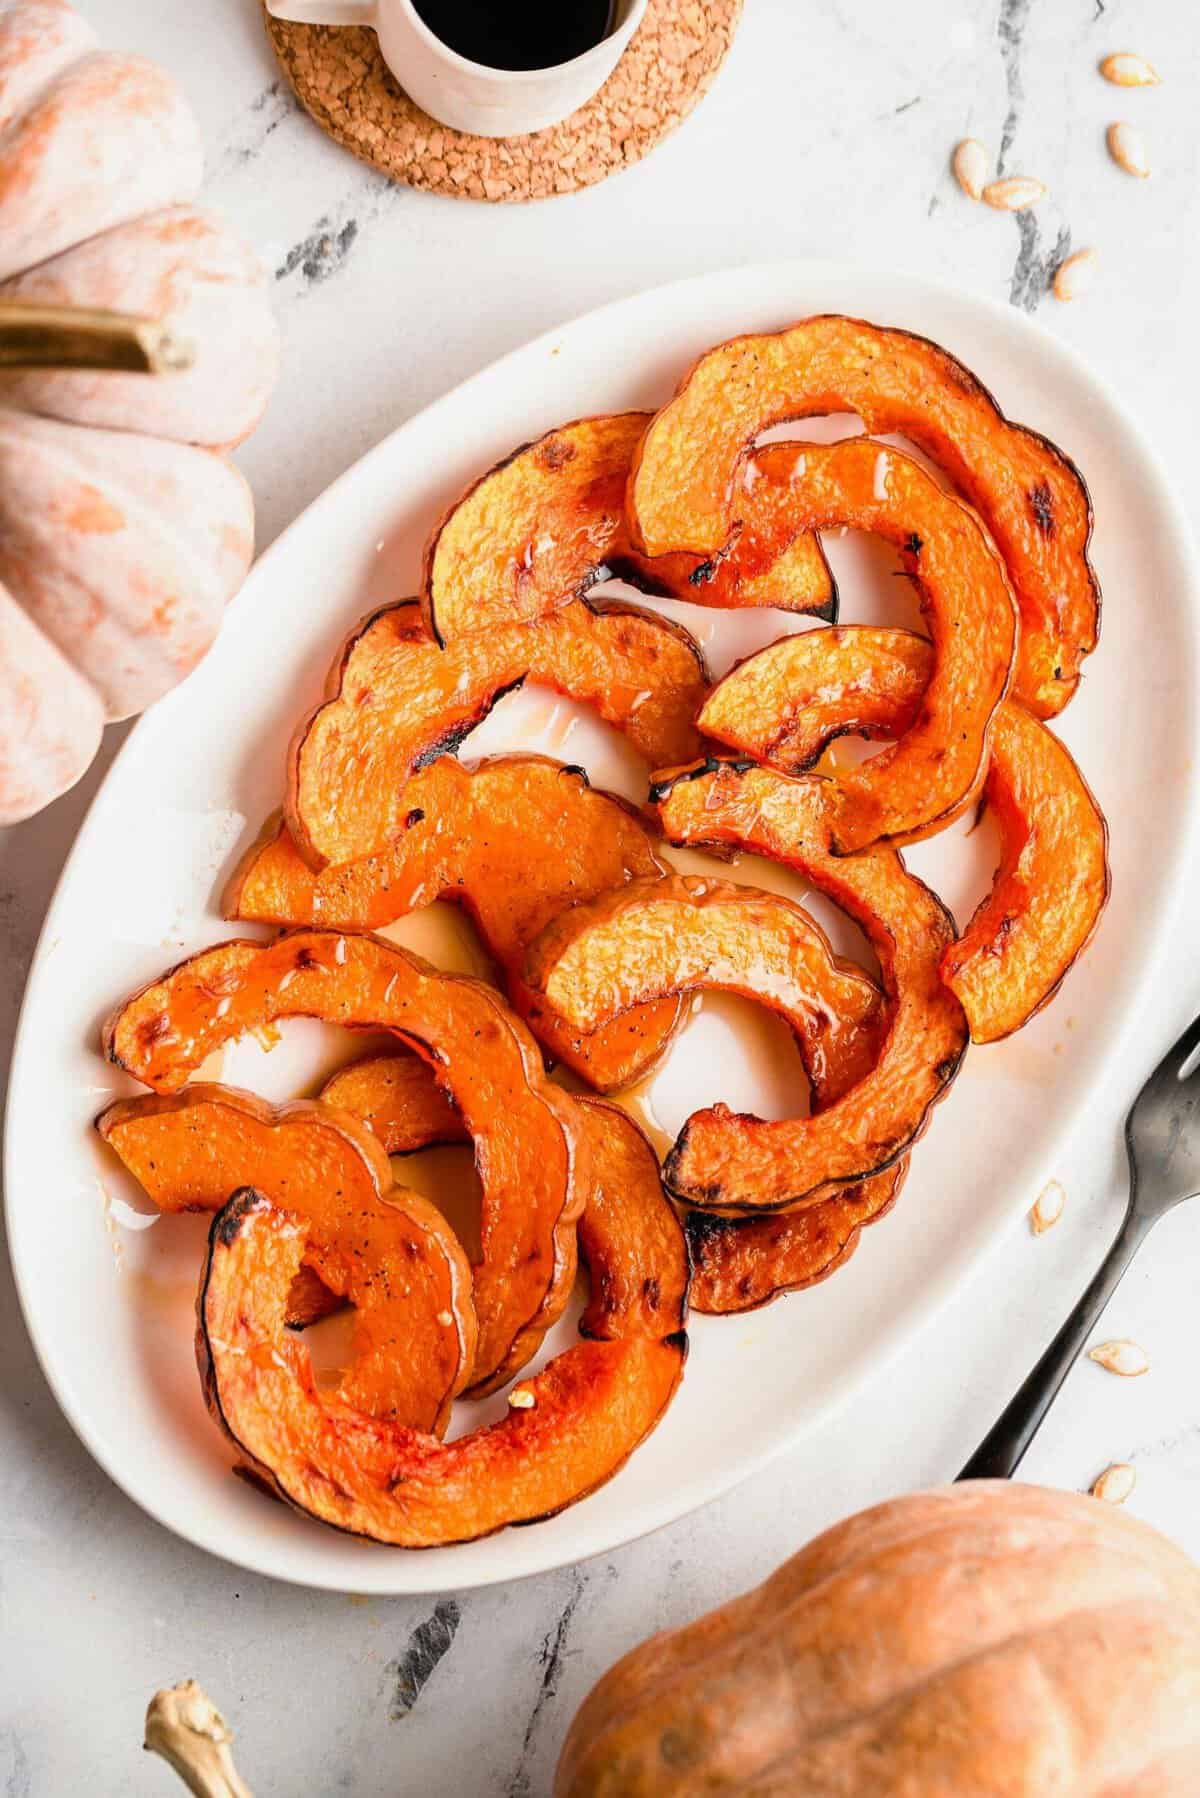 Overhead view of roasted koginut squash slices on white serving platter